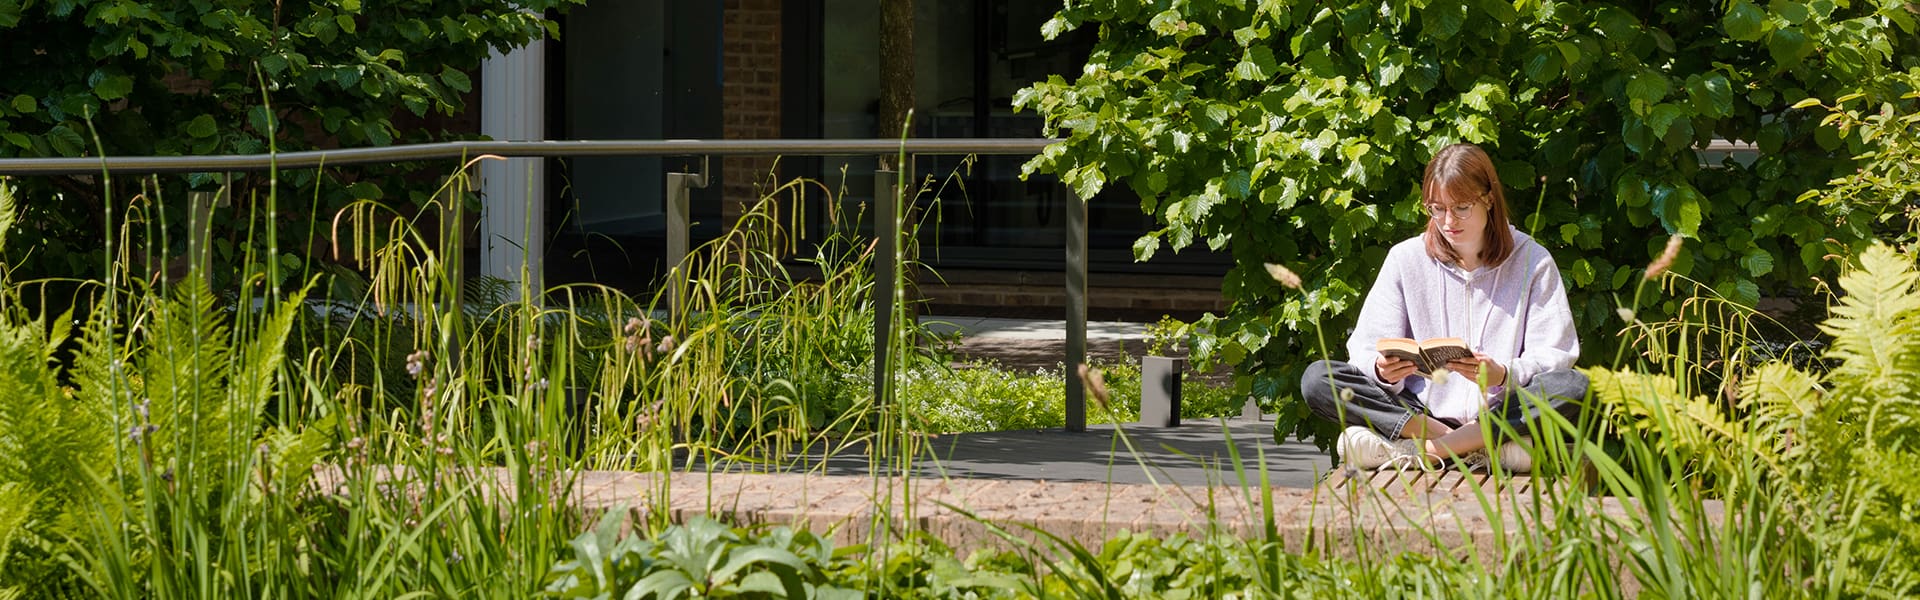 A student sits reading surrounded by greenery